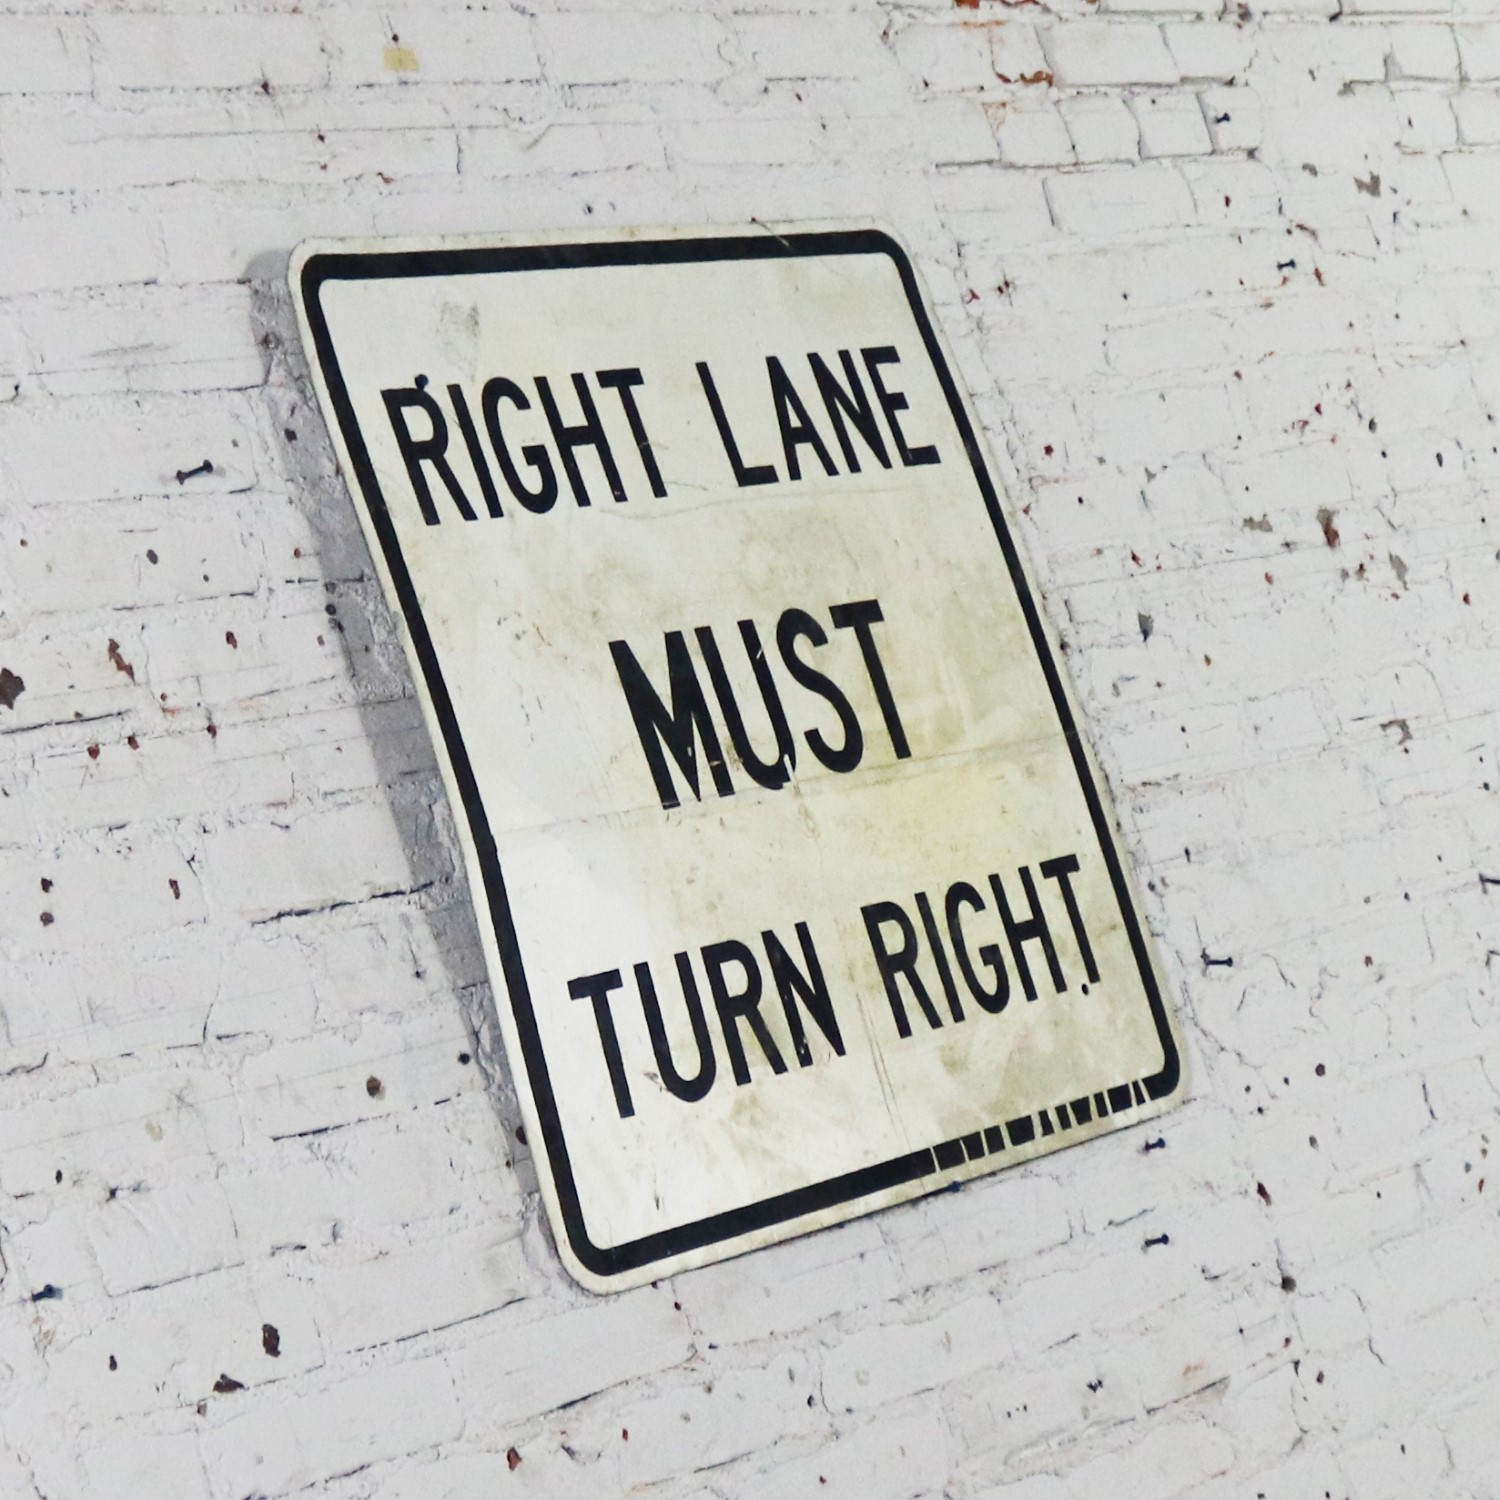 Vintage Right Lane Must Turn Right Large Steel Traffic Sign